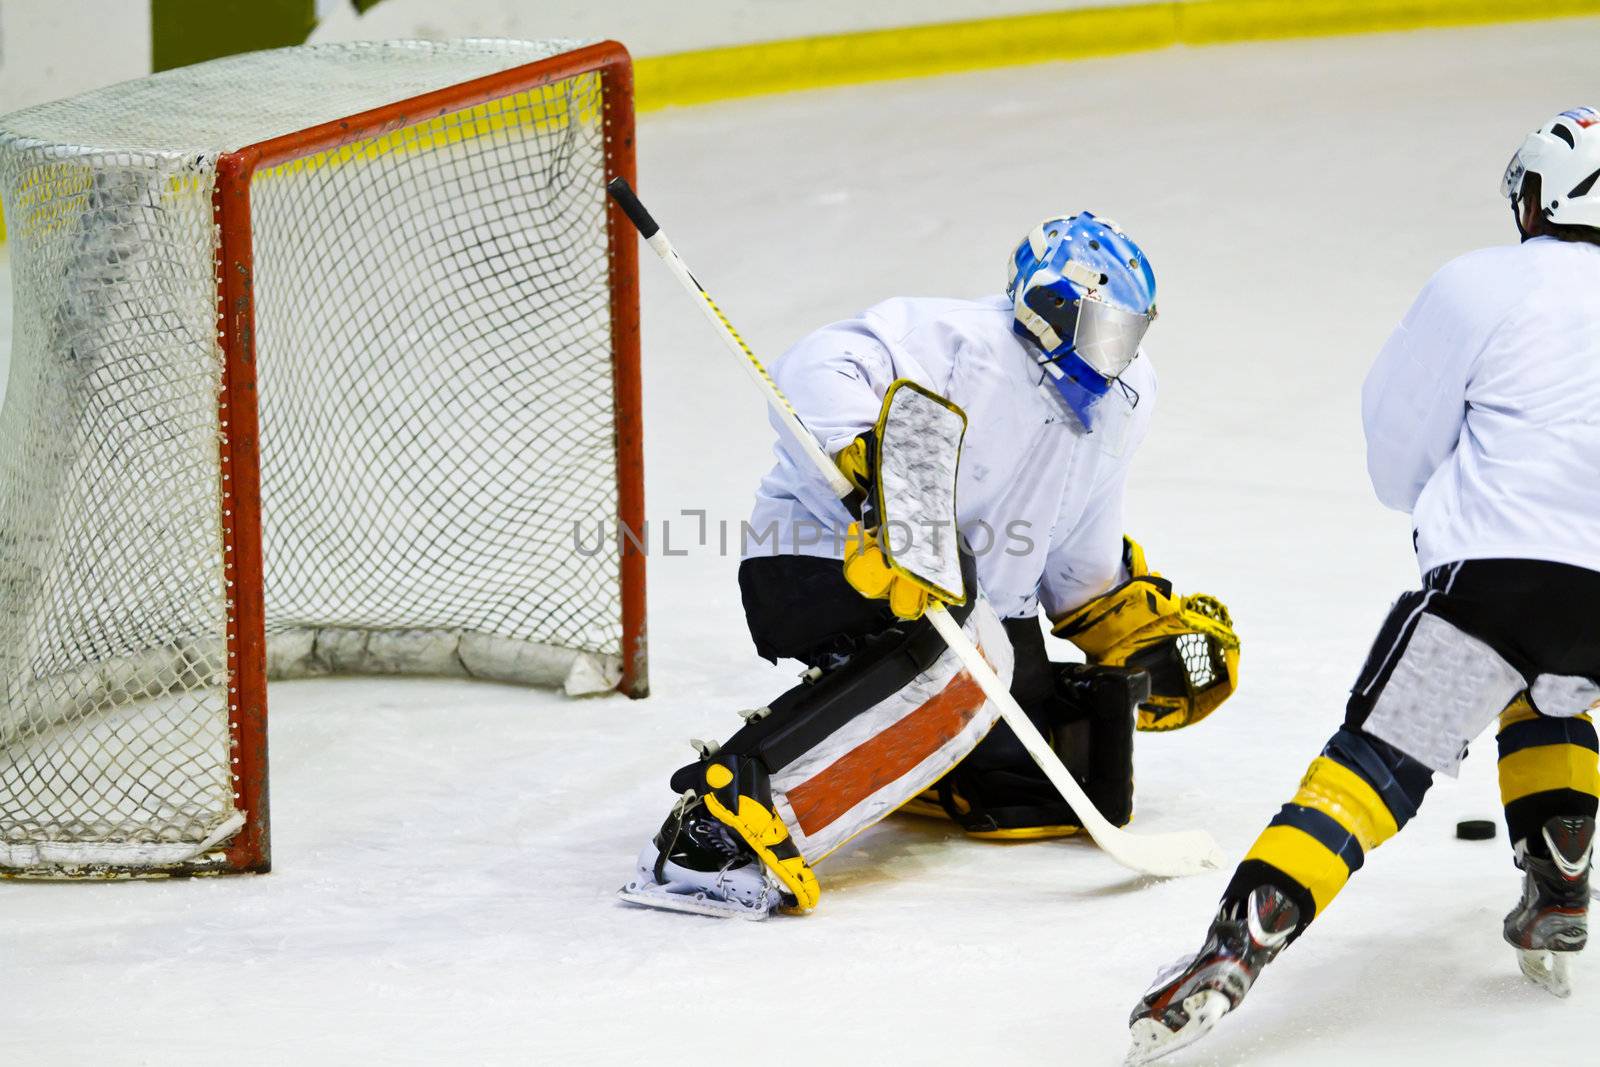 hockey player during a game by lsantilli